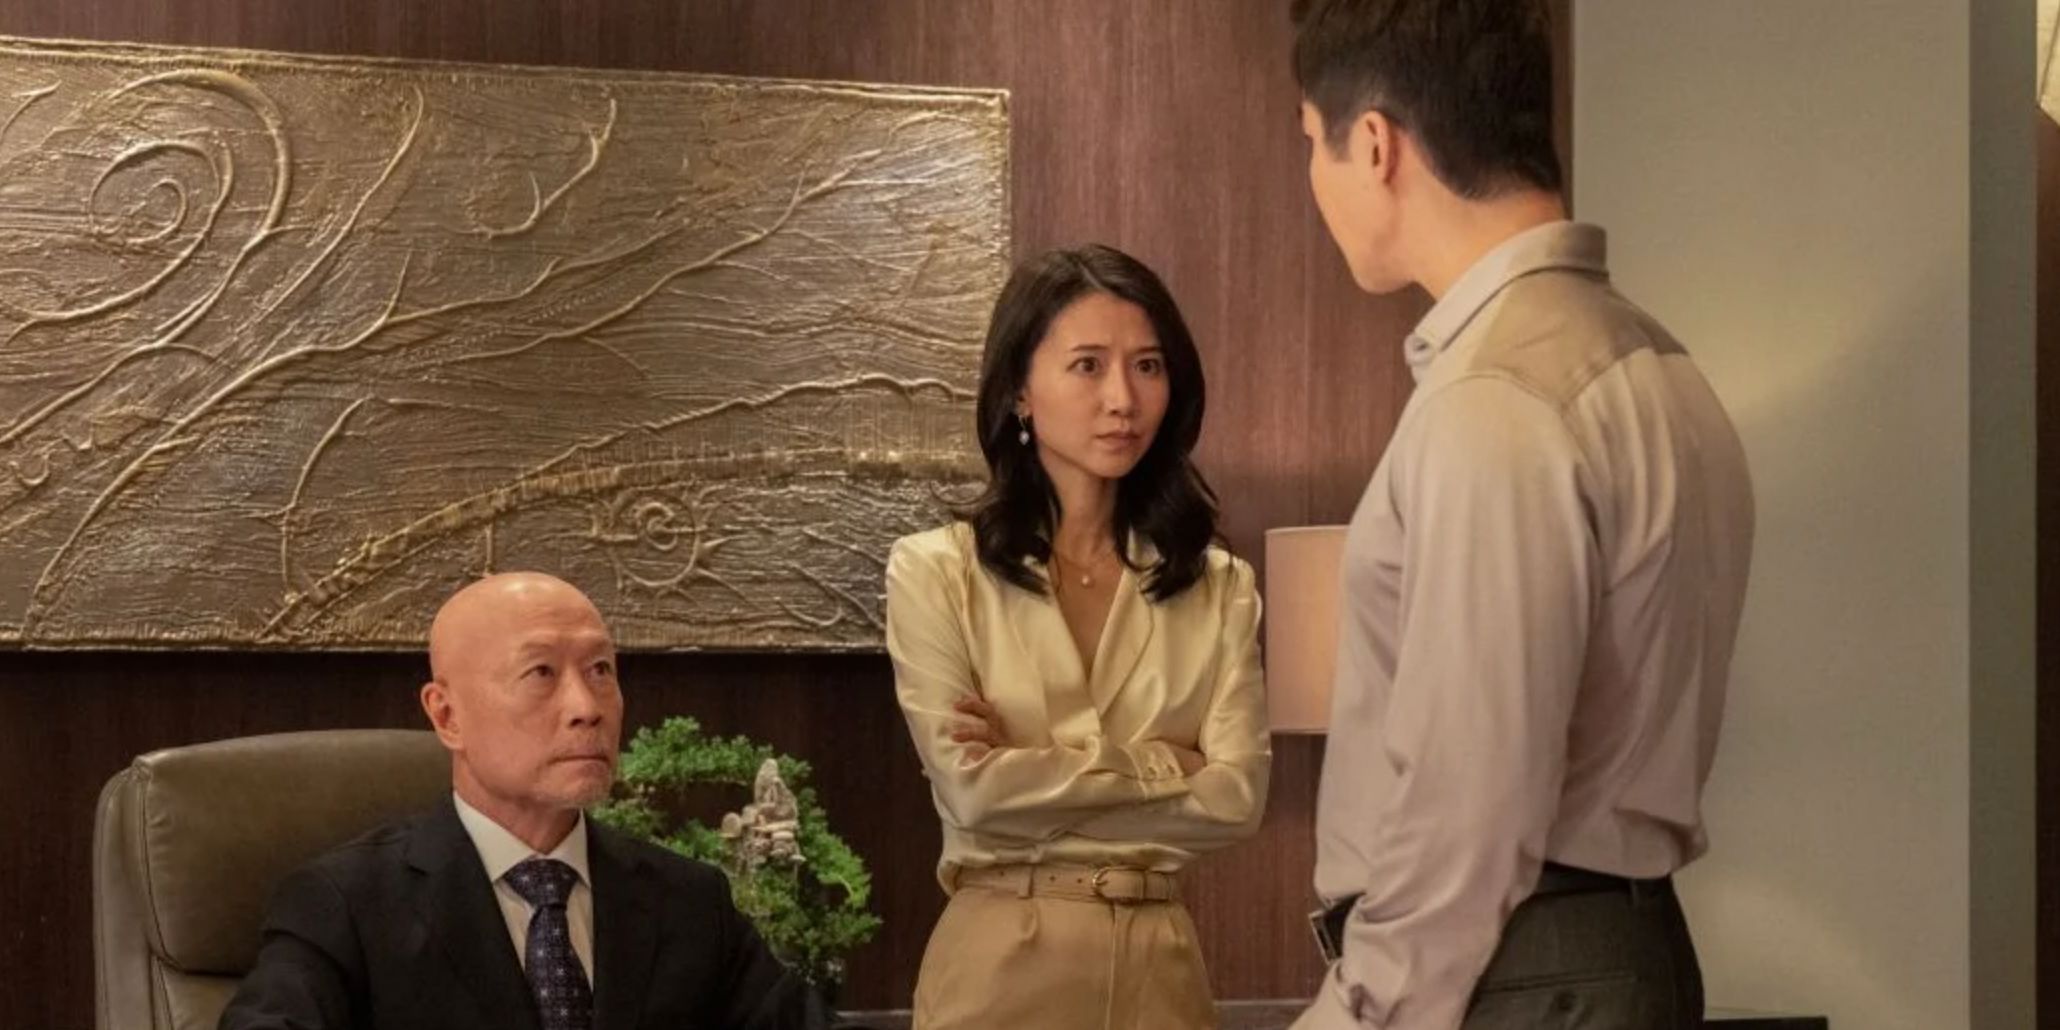 Juliette stand next to her father while her brother speaks in Kung Fu